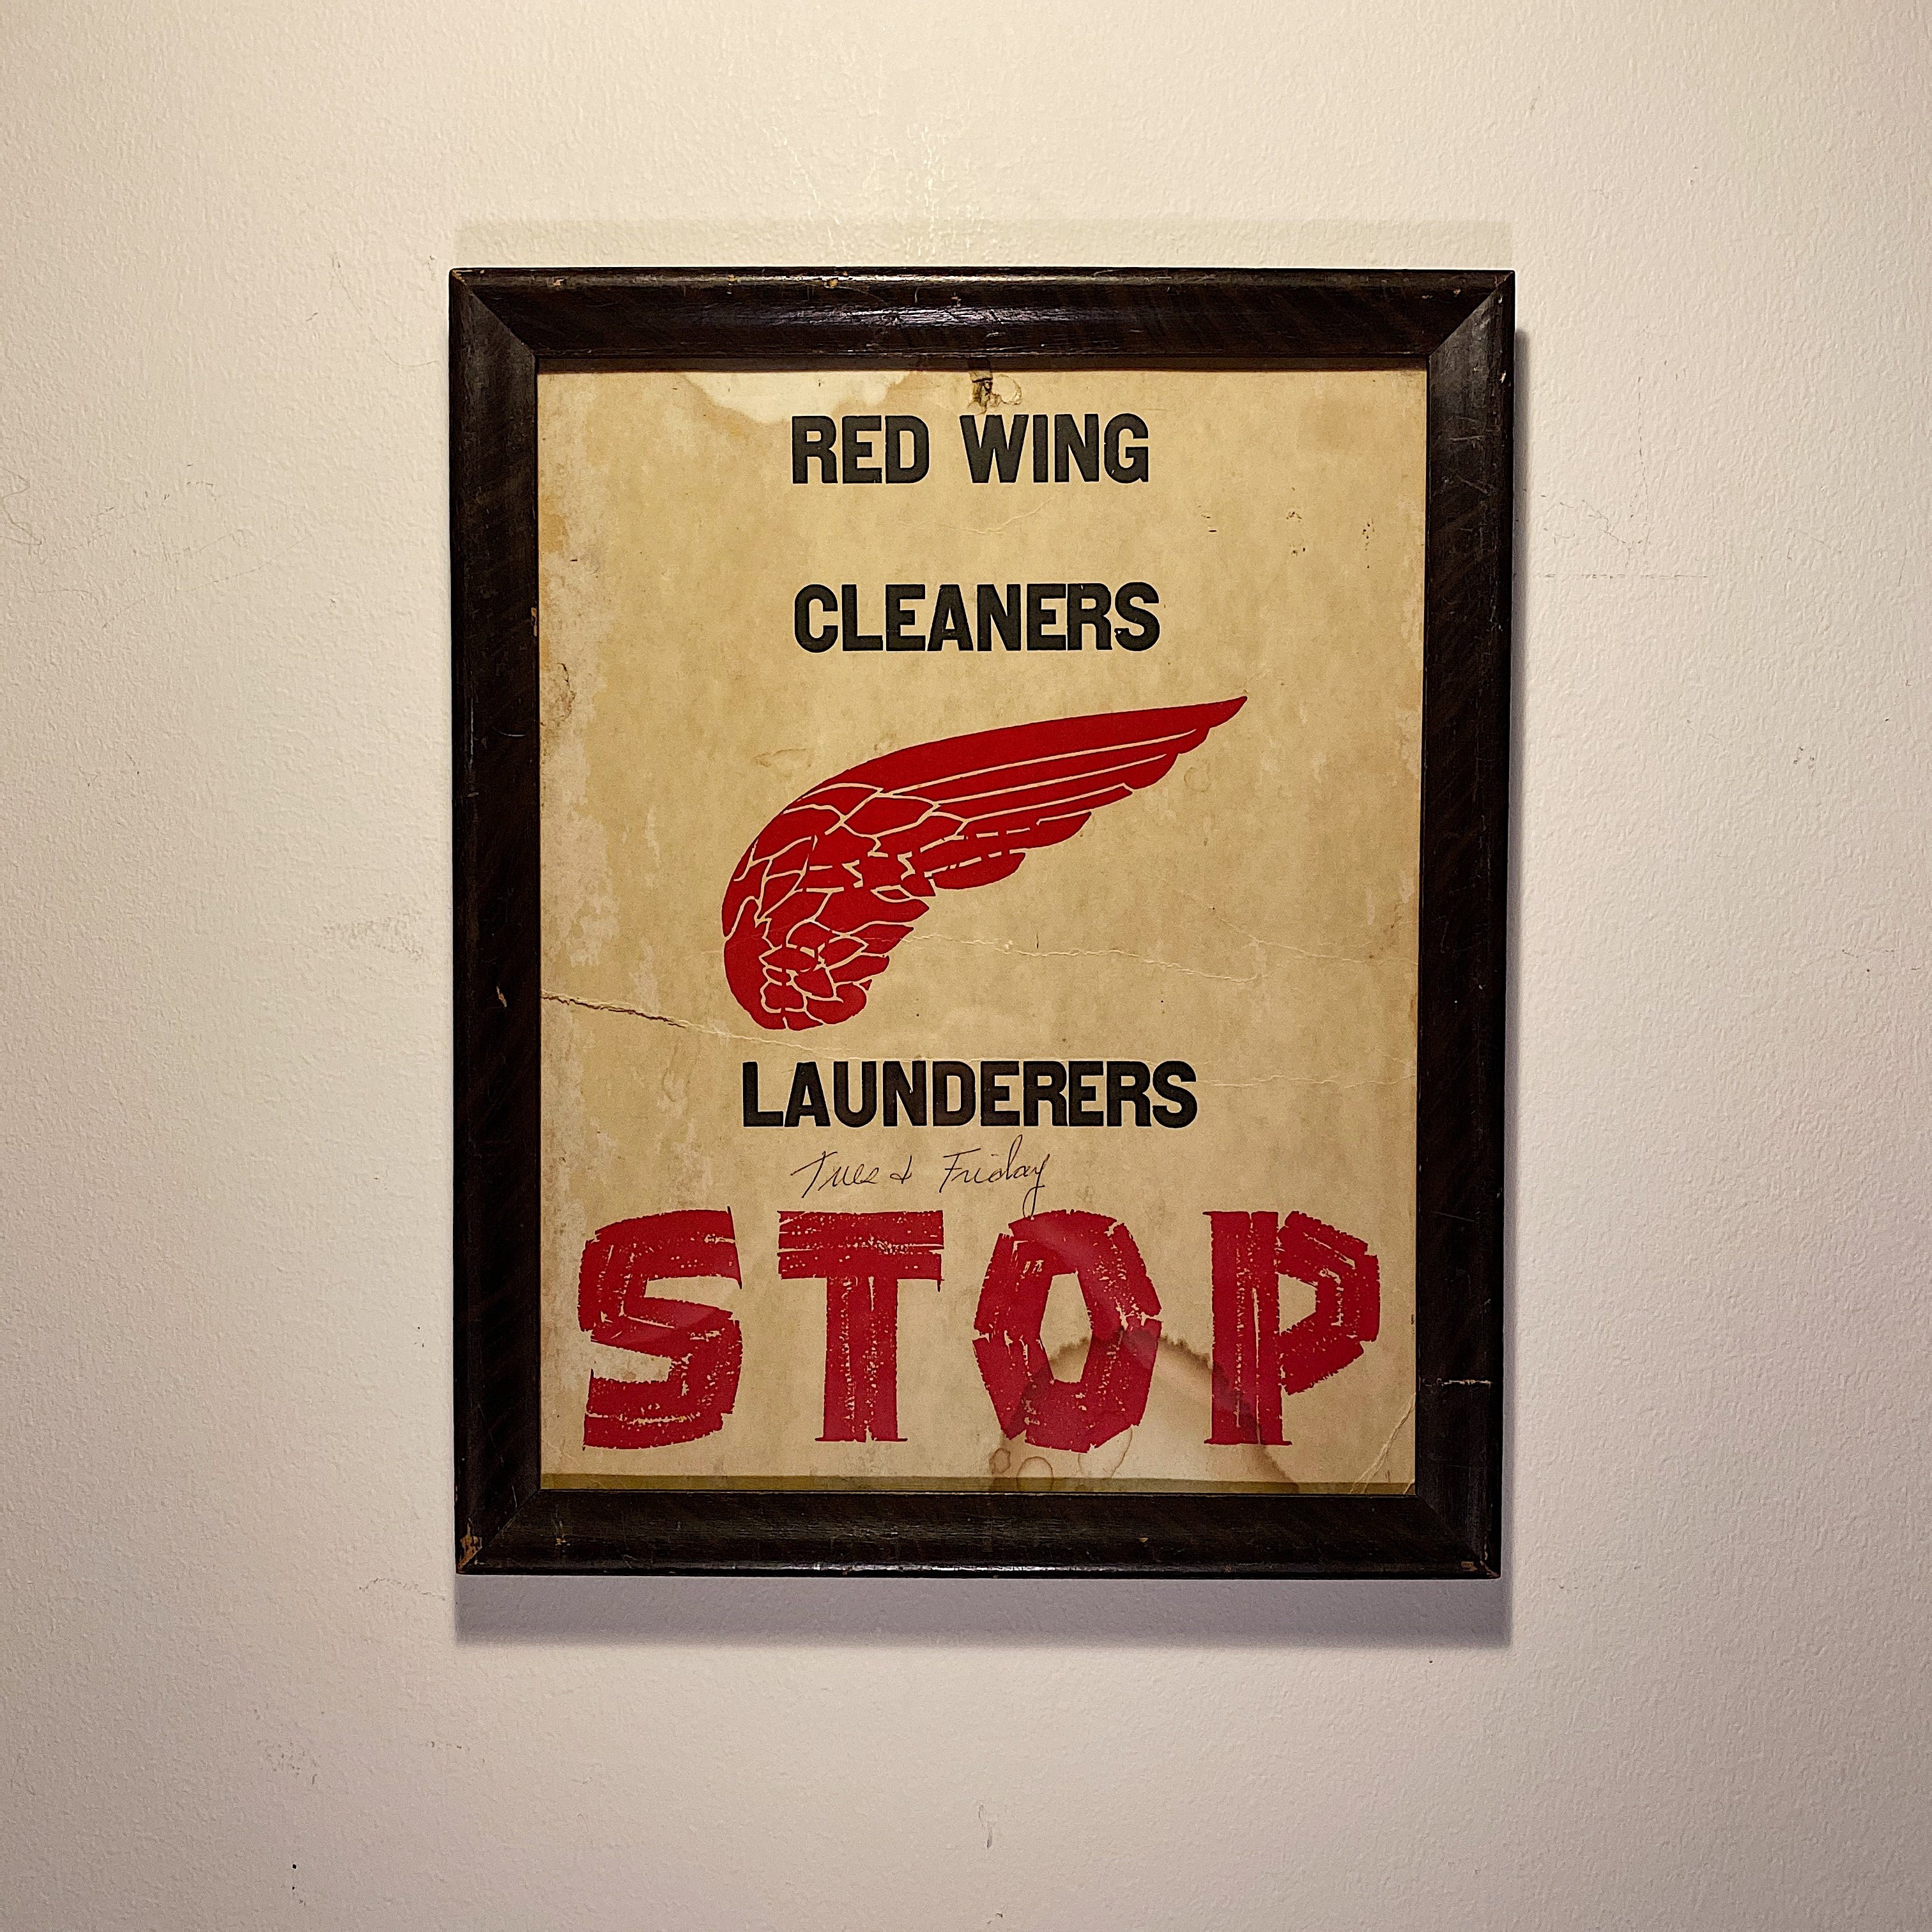 Vintage Red Wing Store Sign - 1950s Cleaning Launder - Leather Work Boots -  Red Broadside Block Print - Rare Minnesota History - Cool Decor